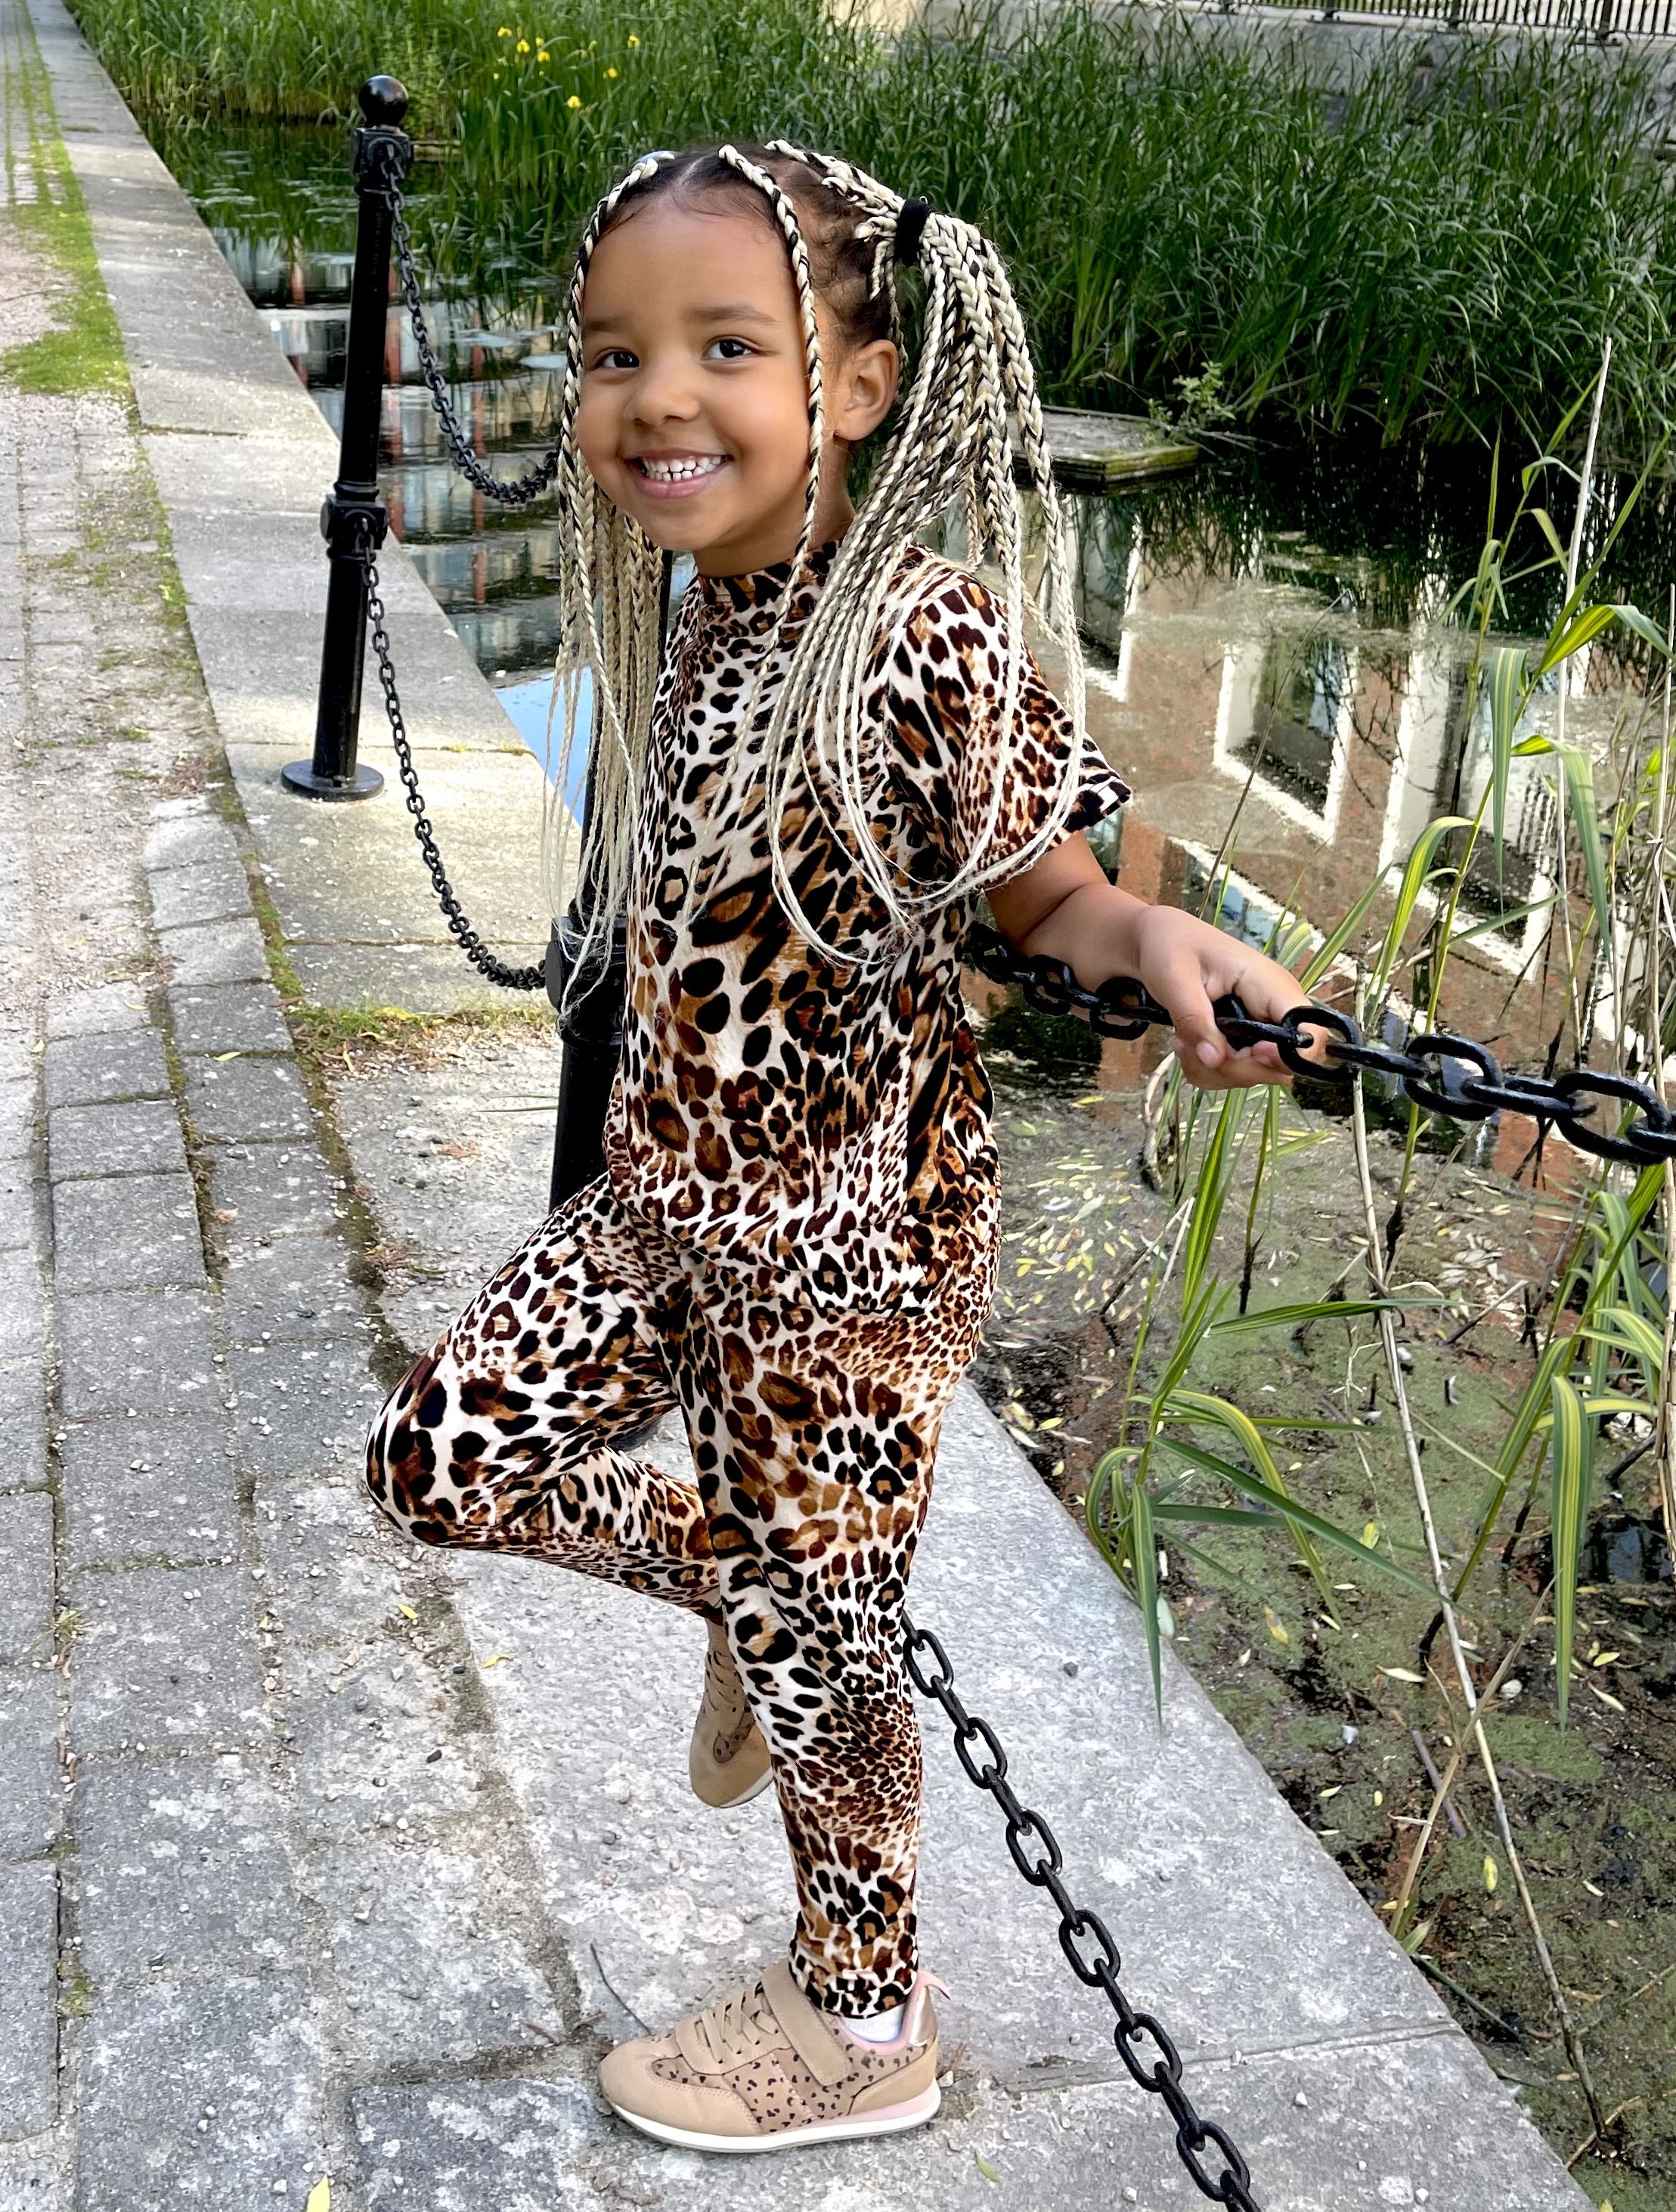 Lynnie is wearing a leopard print set from Novakids. This photo was takin at Canada Water in London, UK.